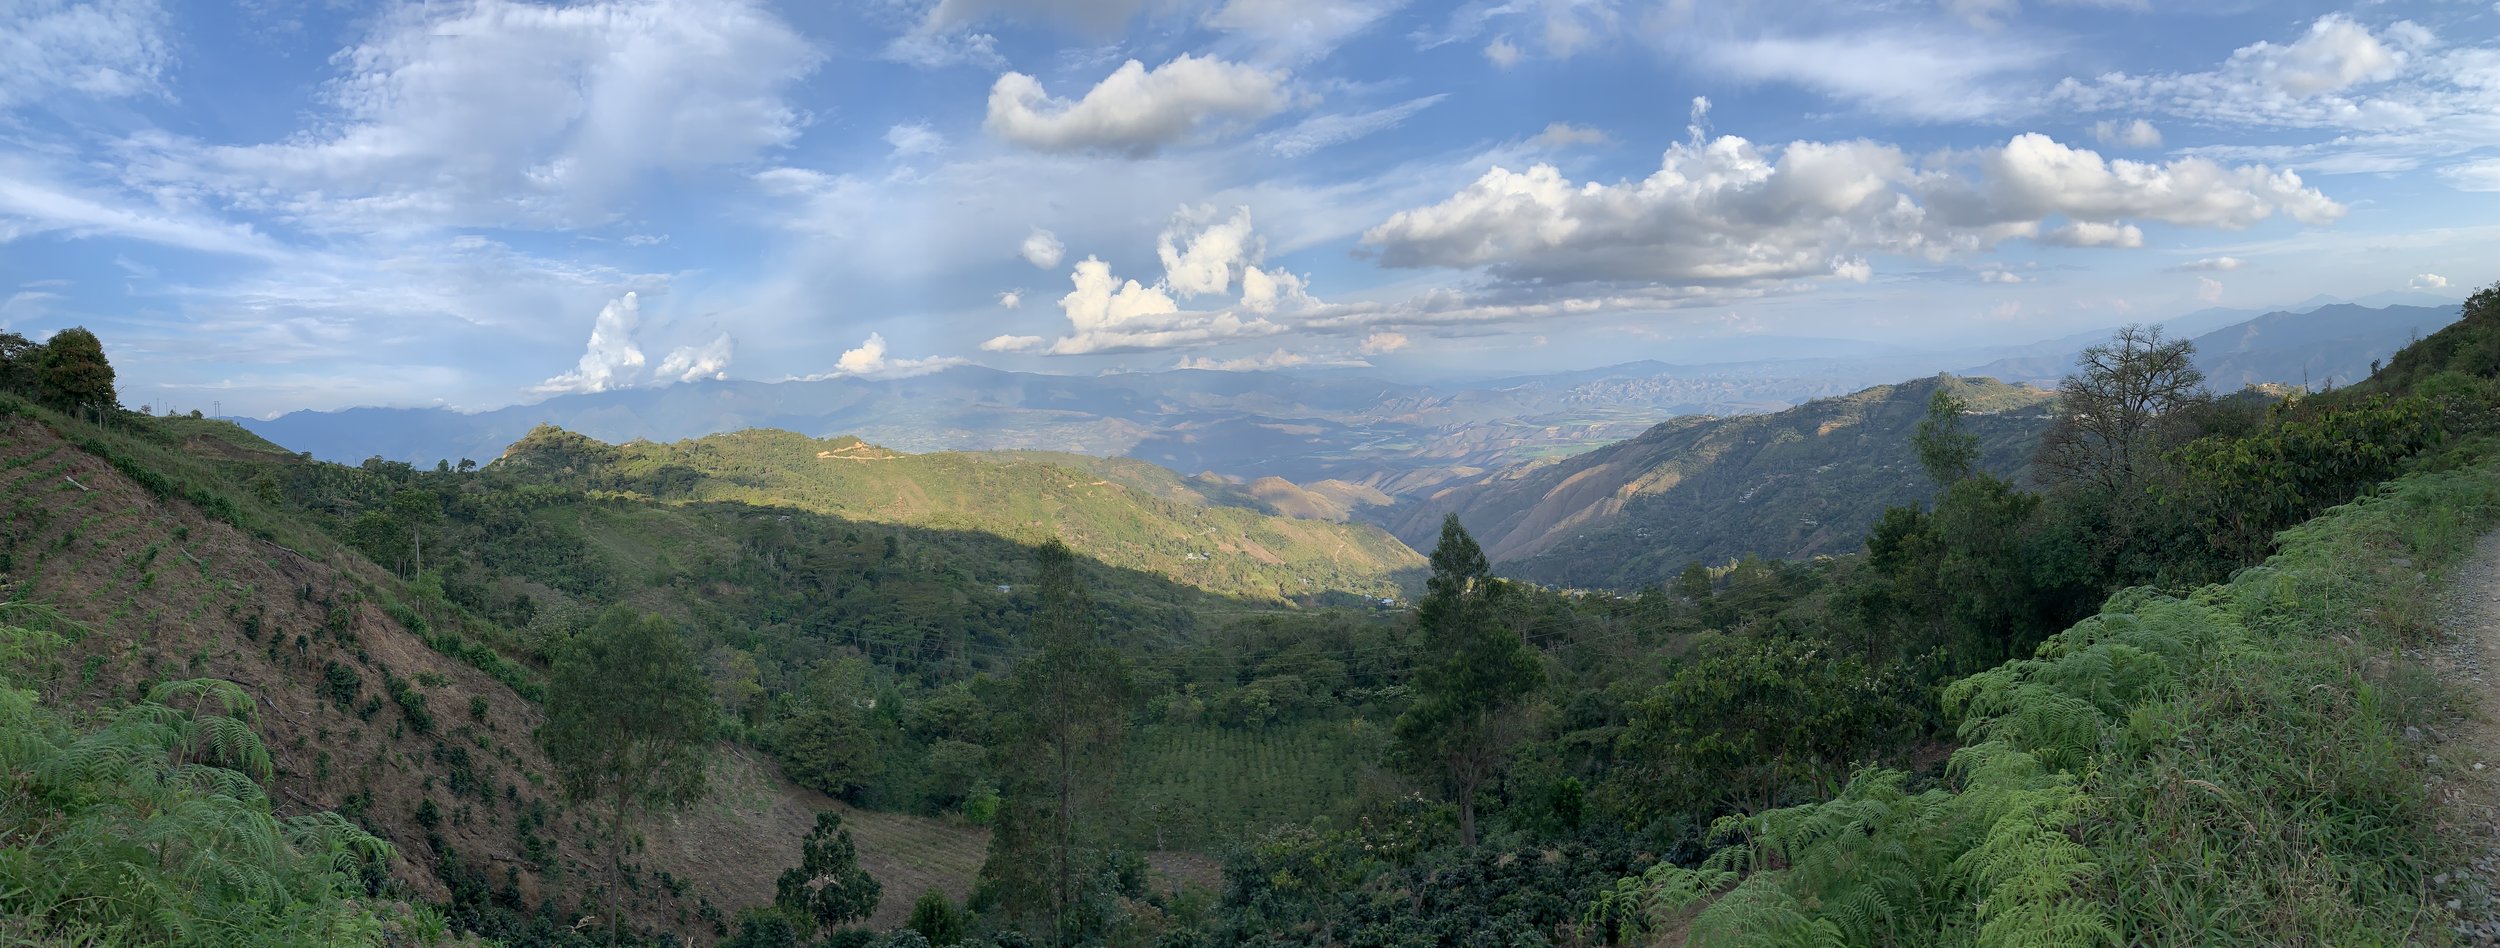  The view towards Rio Chinchipe in Cajamarca 